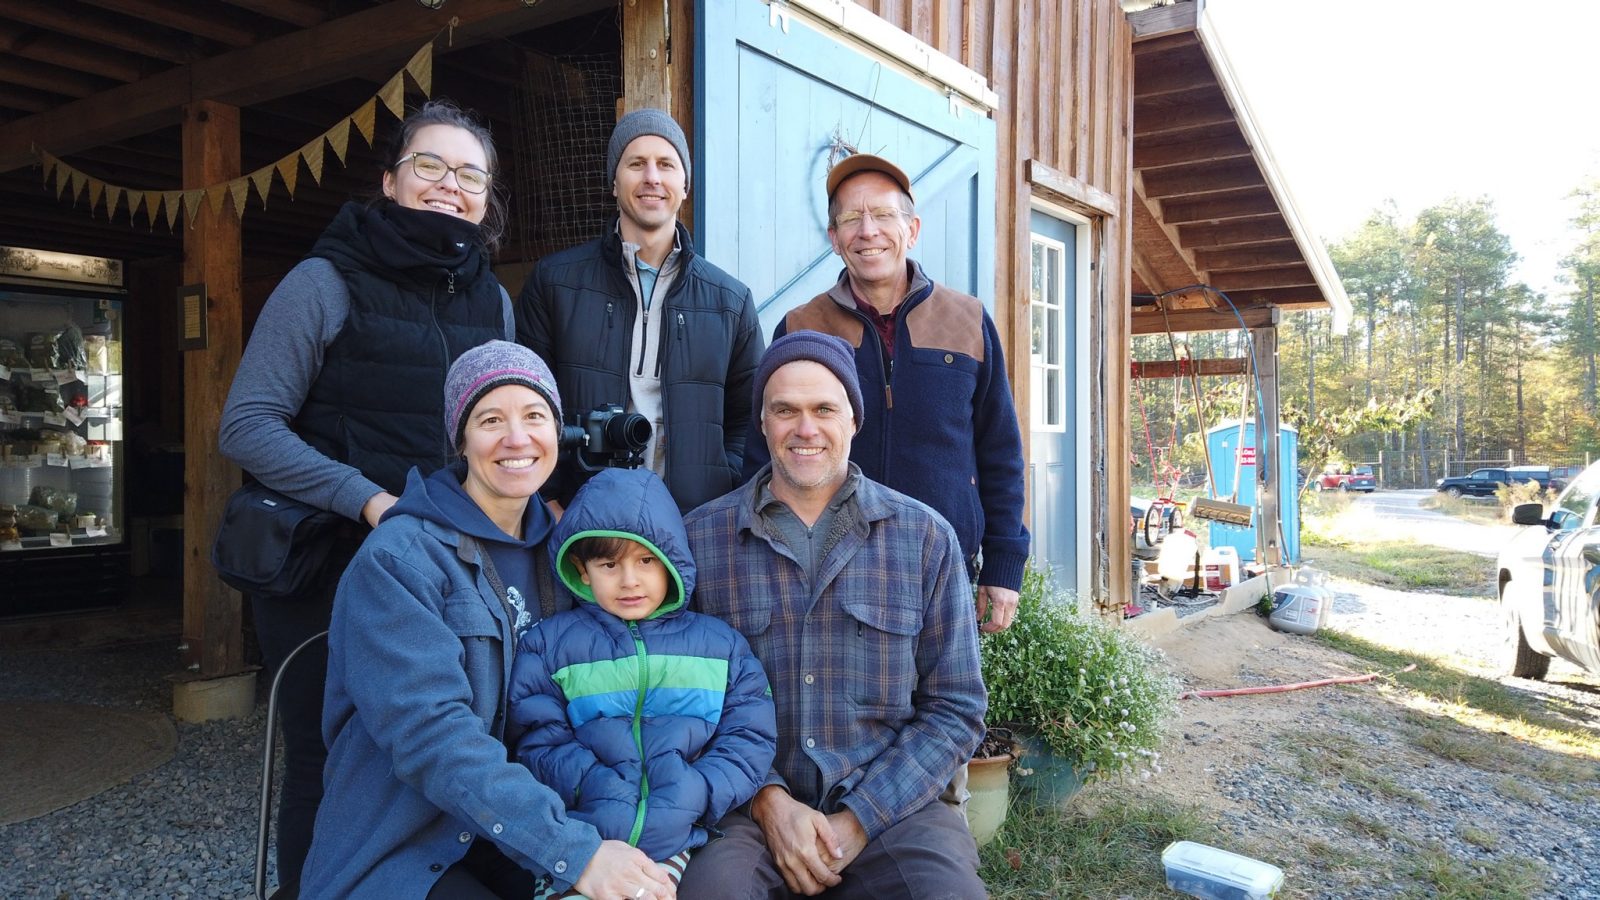 Janet Aardema and Dan Dignon of Broadfork Farm and their daughter, along with Lizbet Kloot-Palmer, Barrett Self, and Eric Bendfeldt.